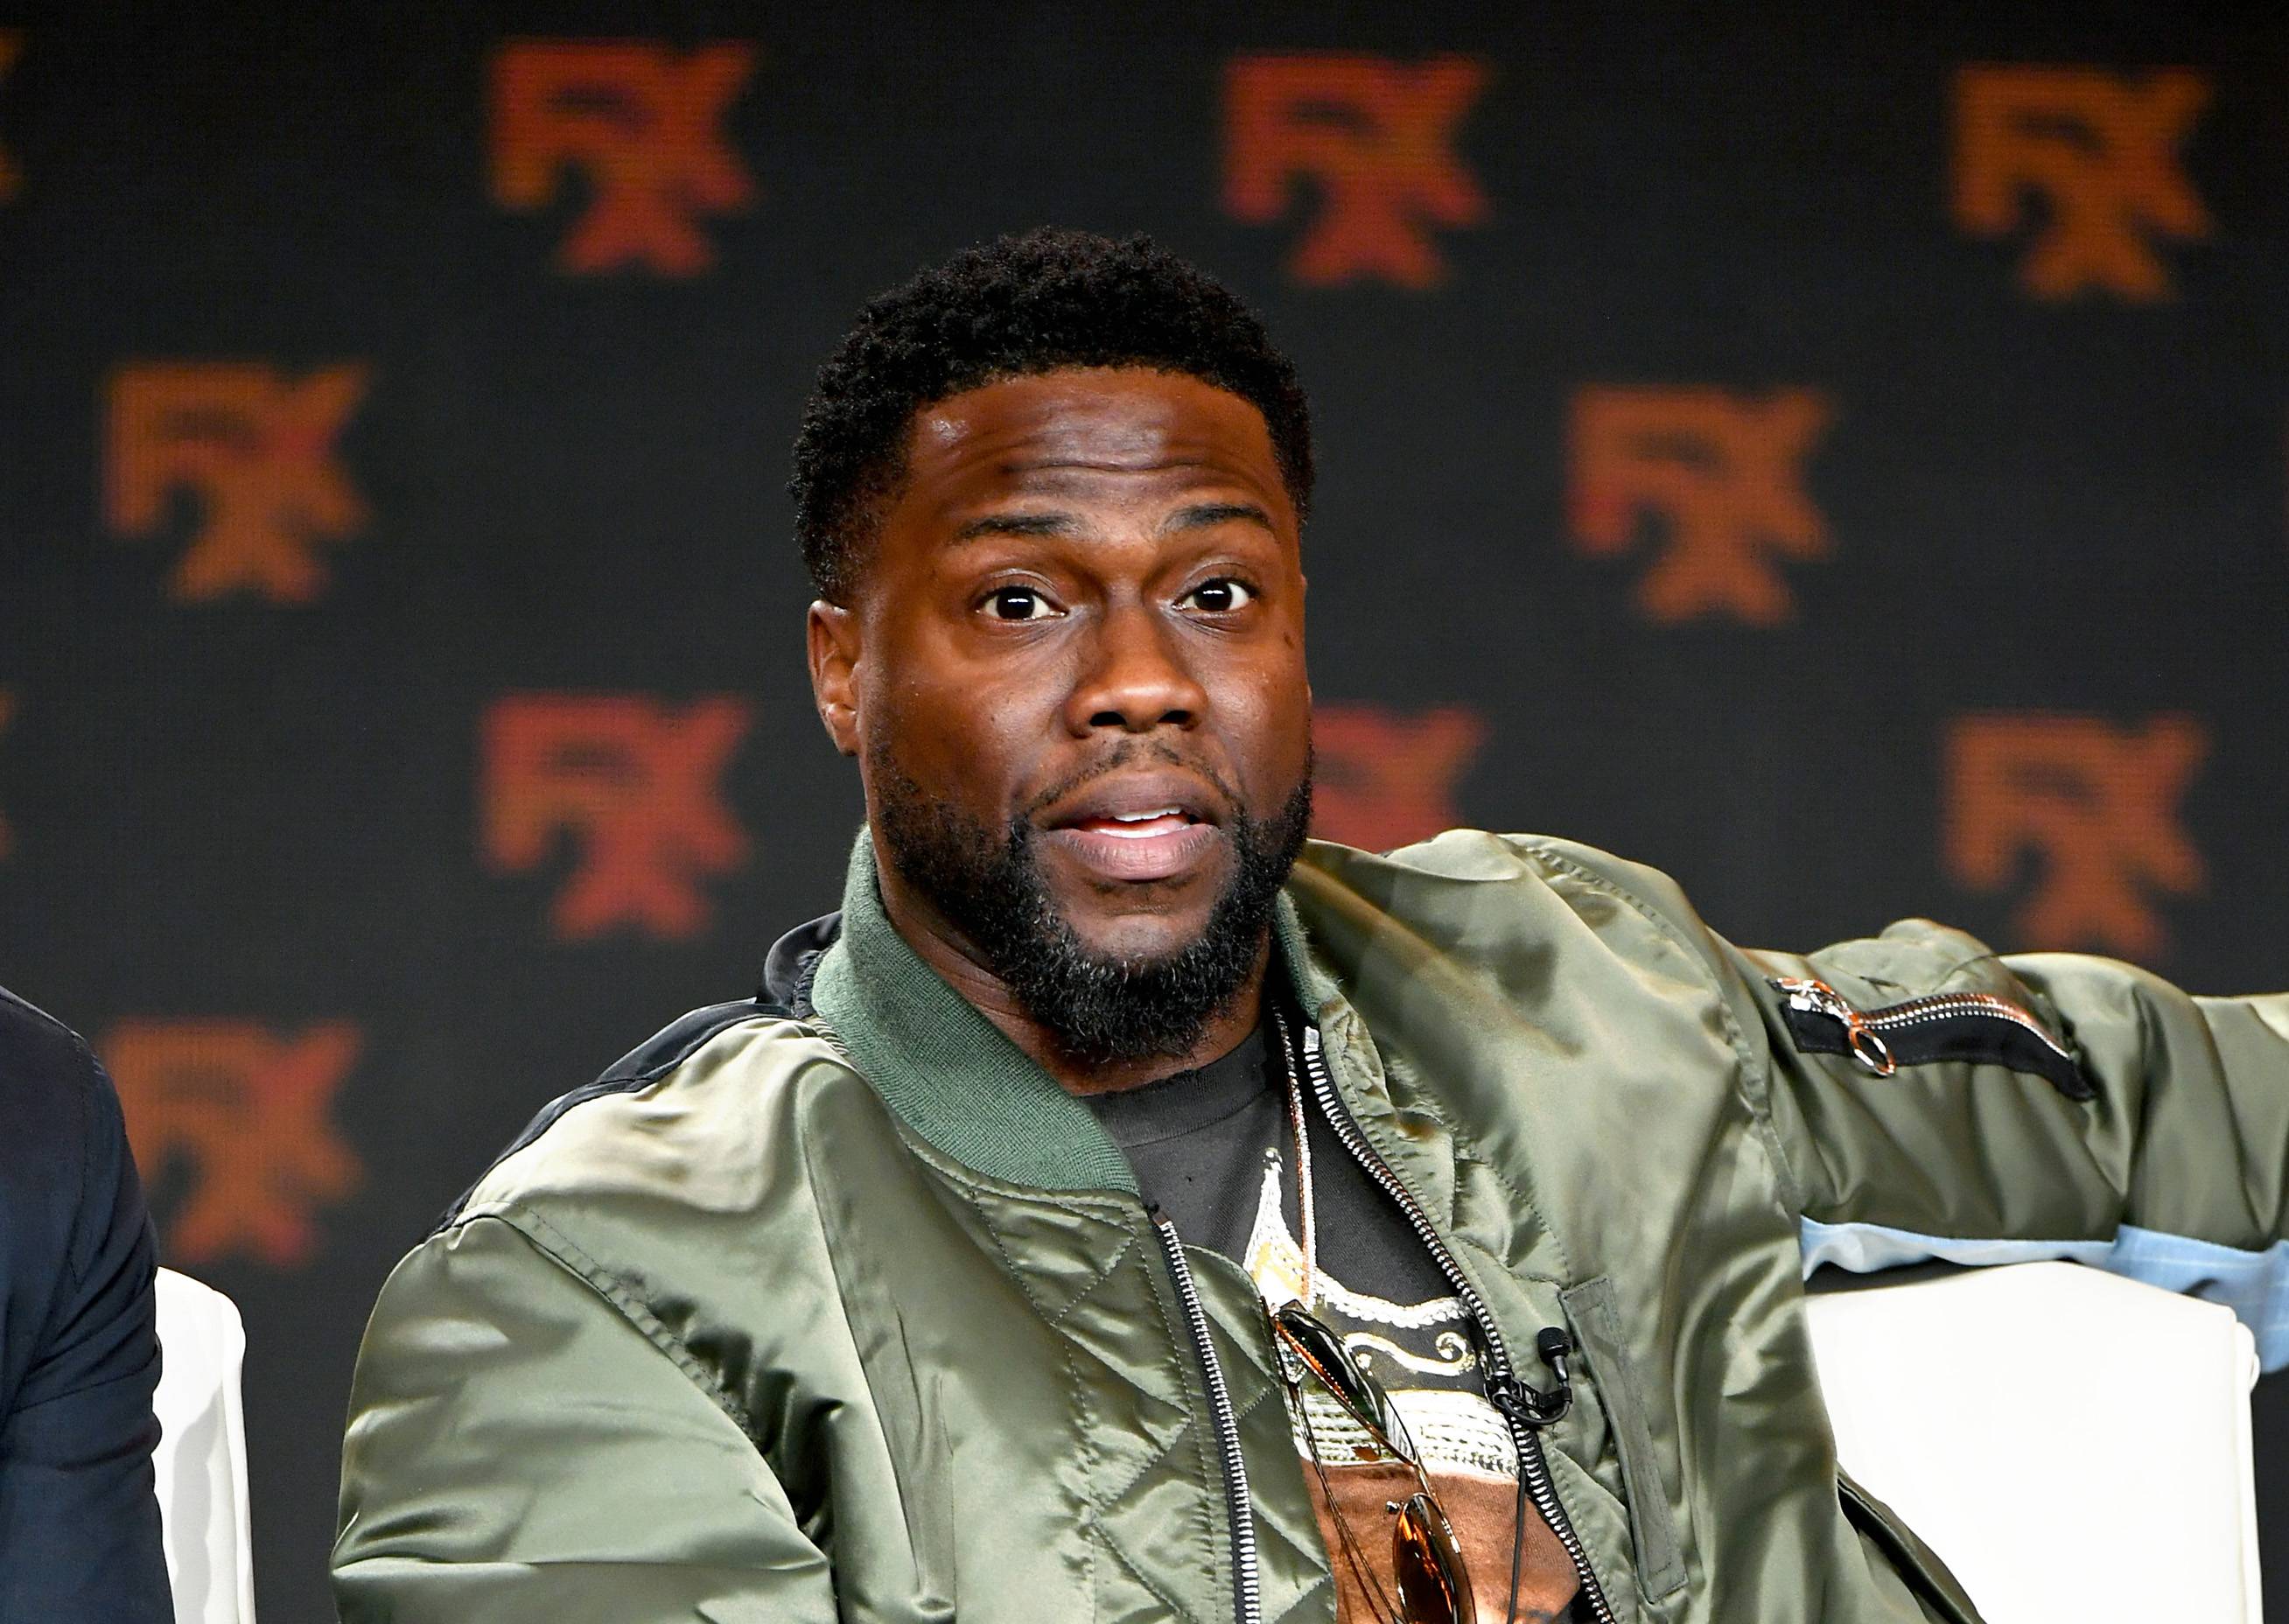 PASADENA, CALIFORNIA - JANUARY 09: Kevin Hart of 'Dave' speaks during the FX segment of the 2020 Winter TCA Tour at The Langham Huntington, Pasadena on January 09, 2020 in Pasadena, California. (Photo by Amy Sussman/Getty Images)